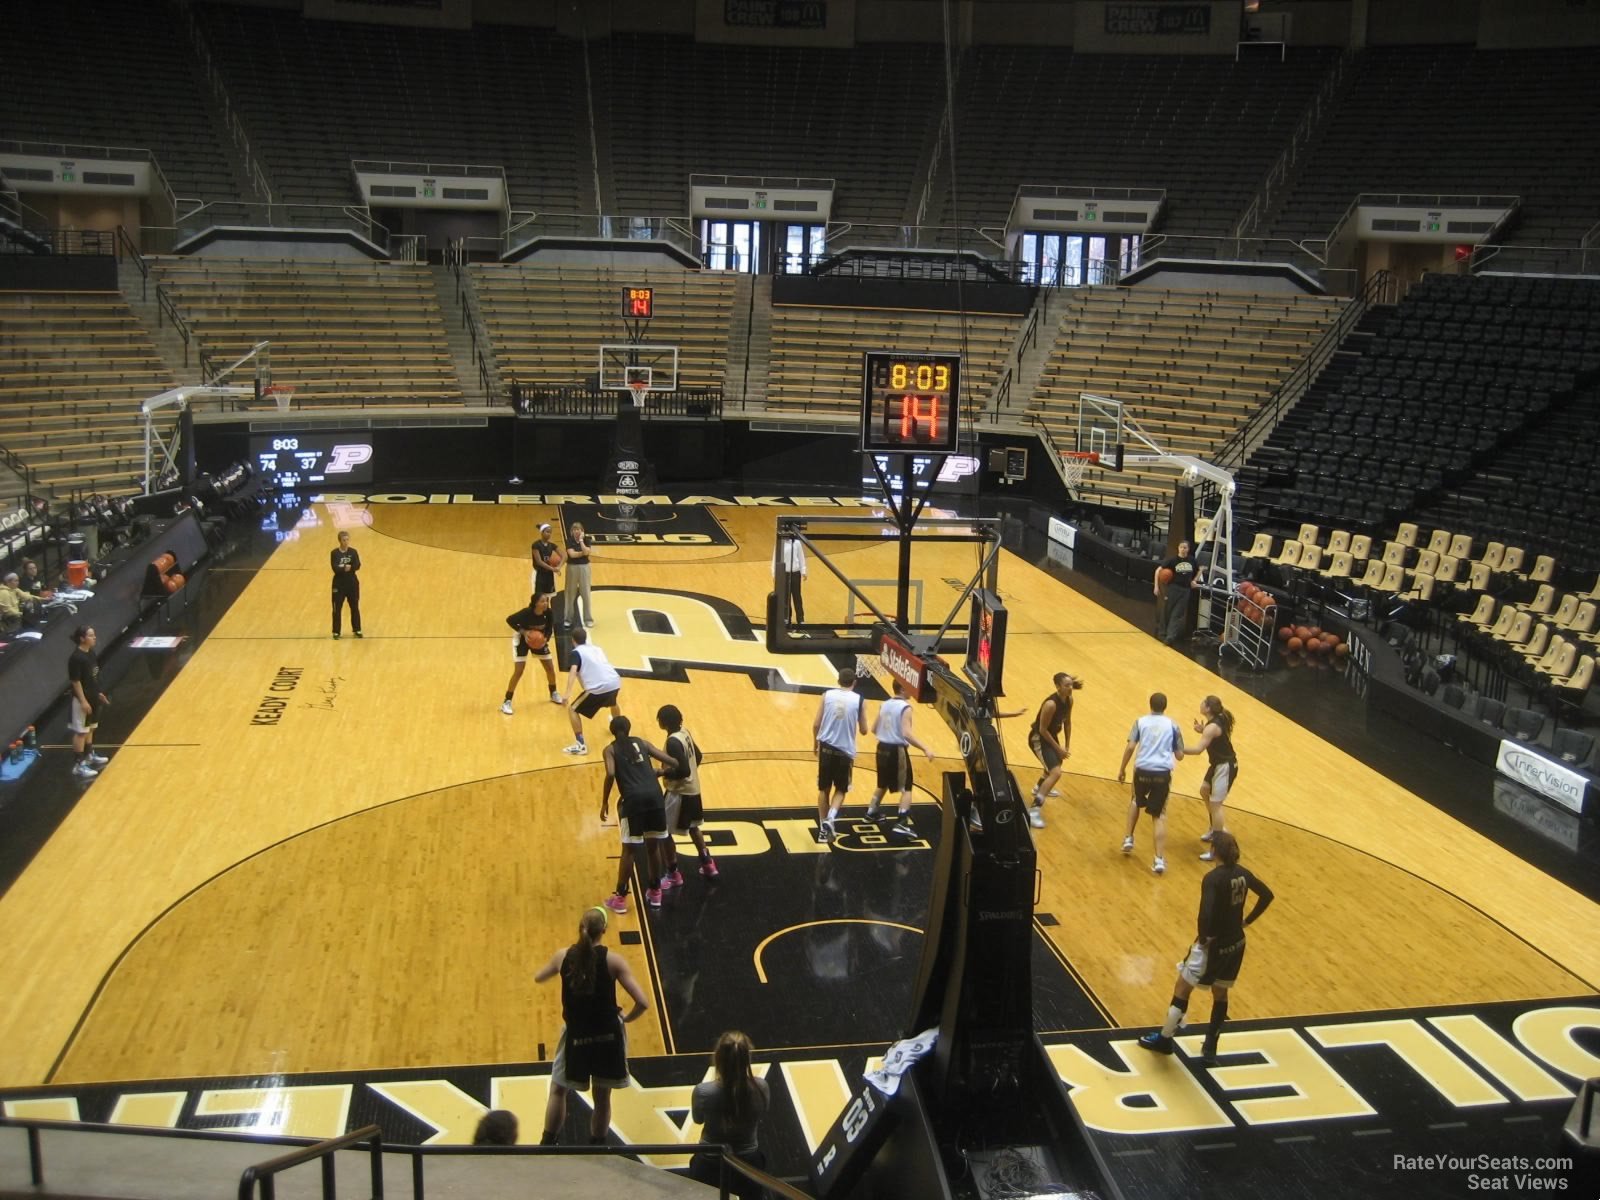 section 14, row 10 seat view  - mackey arena